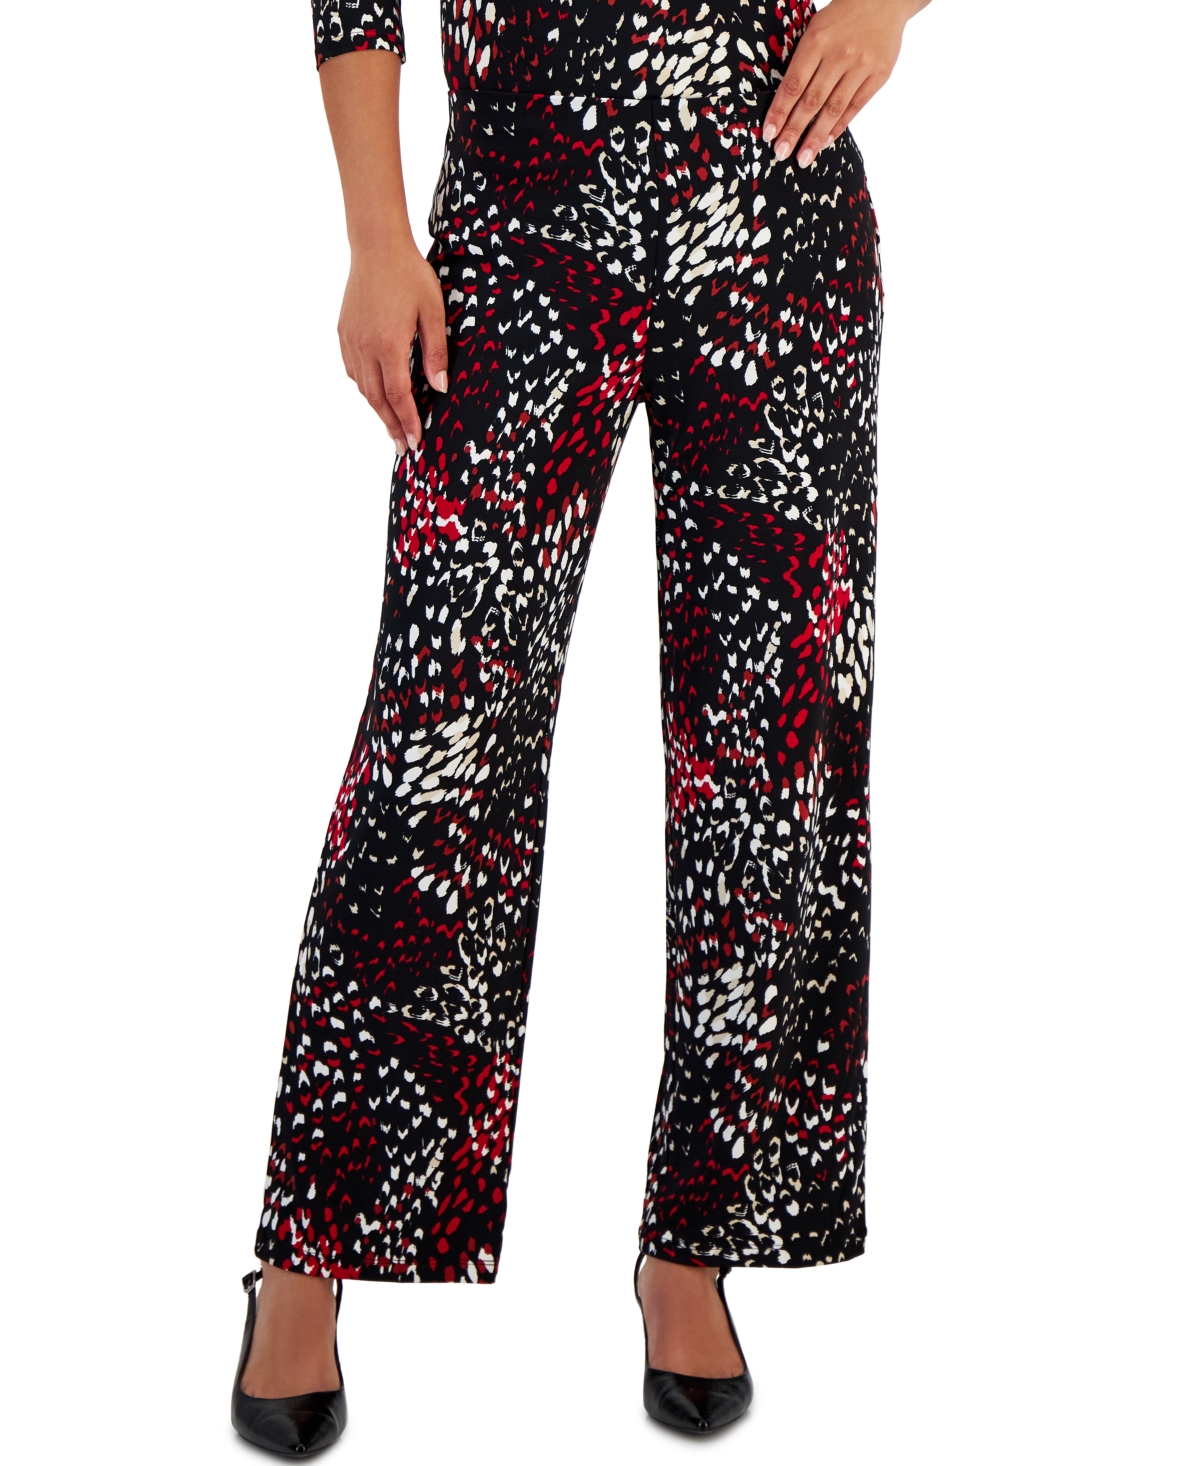 Women's Variation Spots Printed Pull-On Pants, Created for Macy's - Teal Evergreen Combo